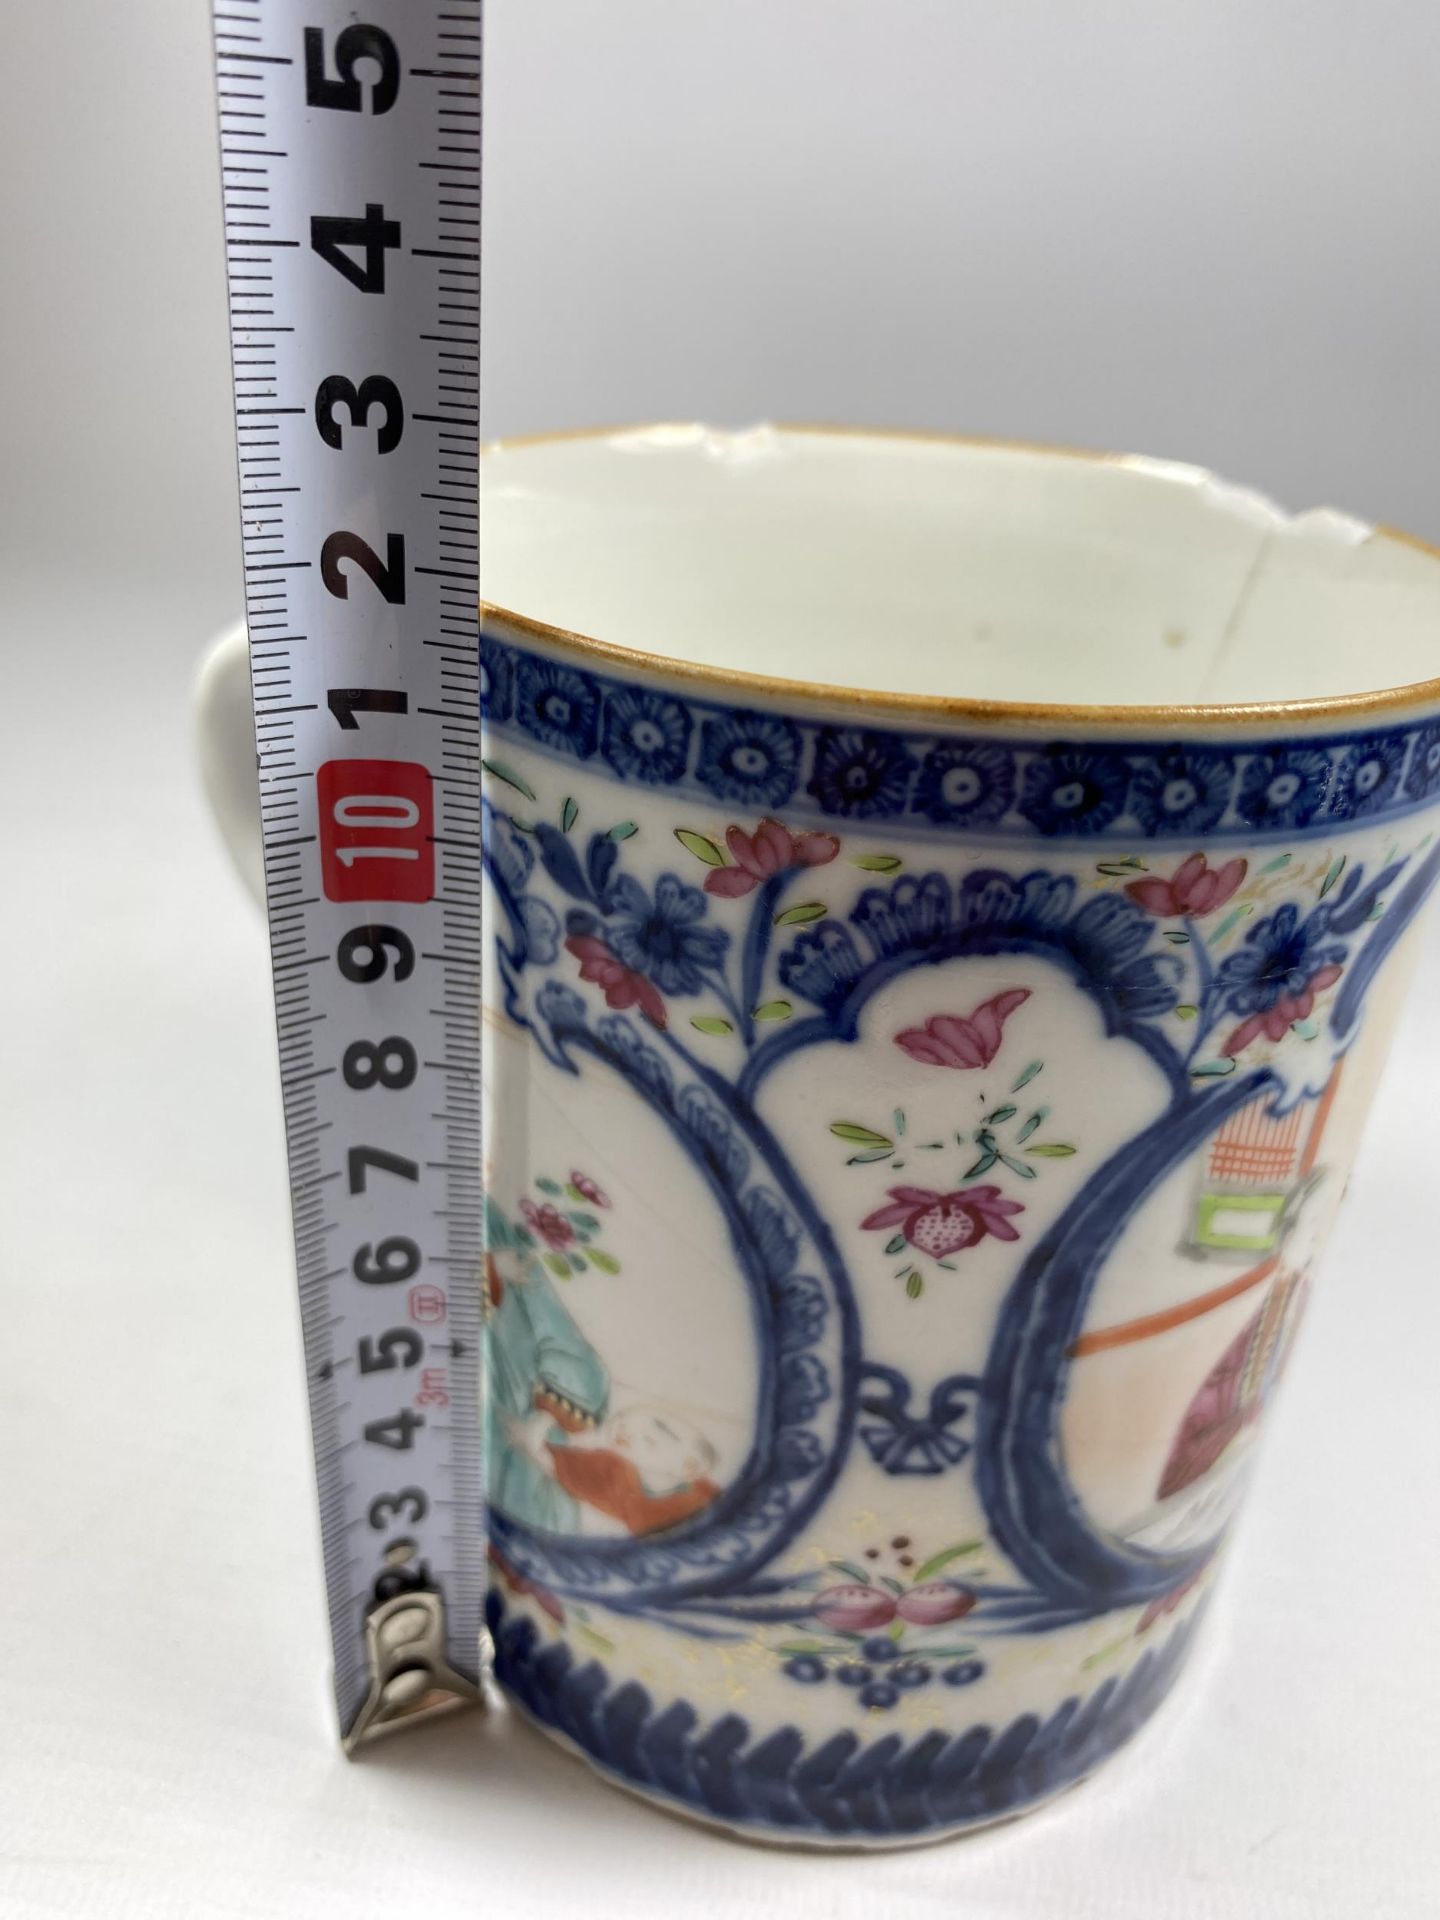 A LATE 18TH CENTURY CHINESE FAMILLE ROSE EXPORT TANKARD DEPICTING FIGURES IN A GARDEN LANDSCAPE, - Image 6 of 6